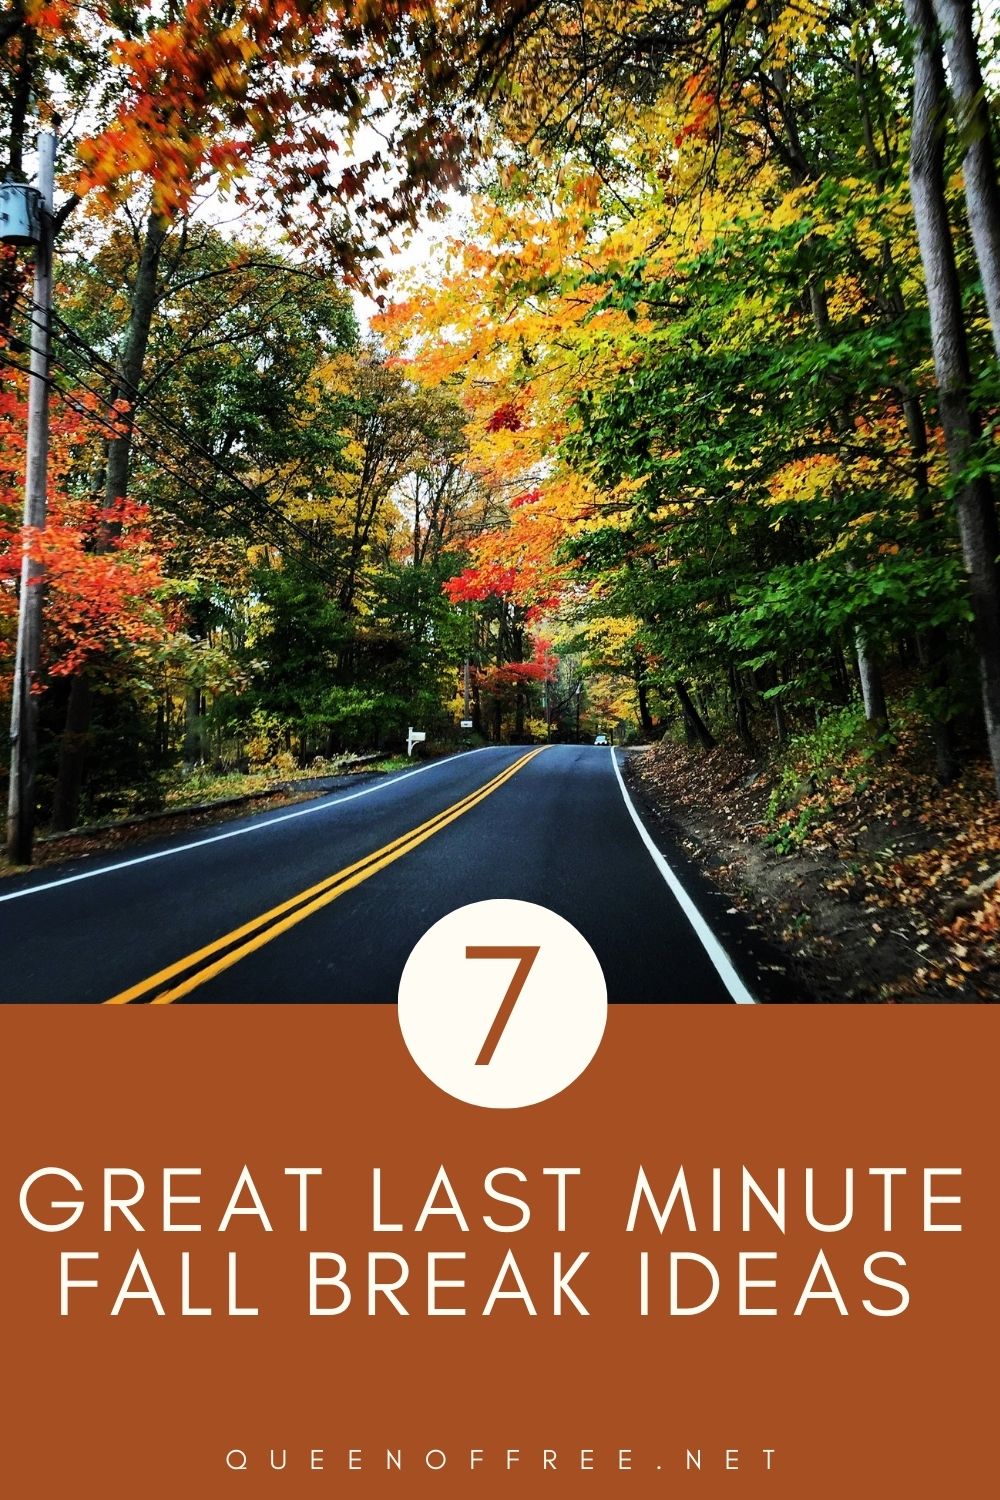 No plan? No money? No worries! These fun, last minute affordable fall break ideas are perfect for any budget!